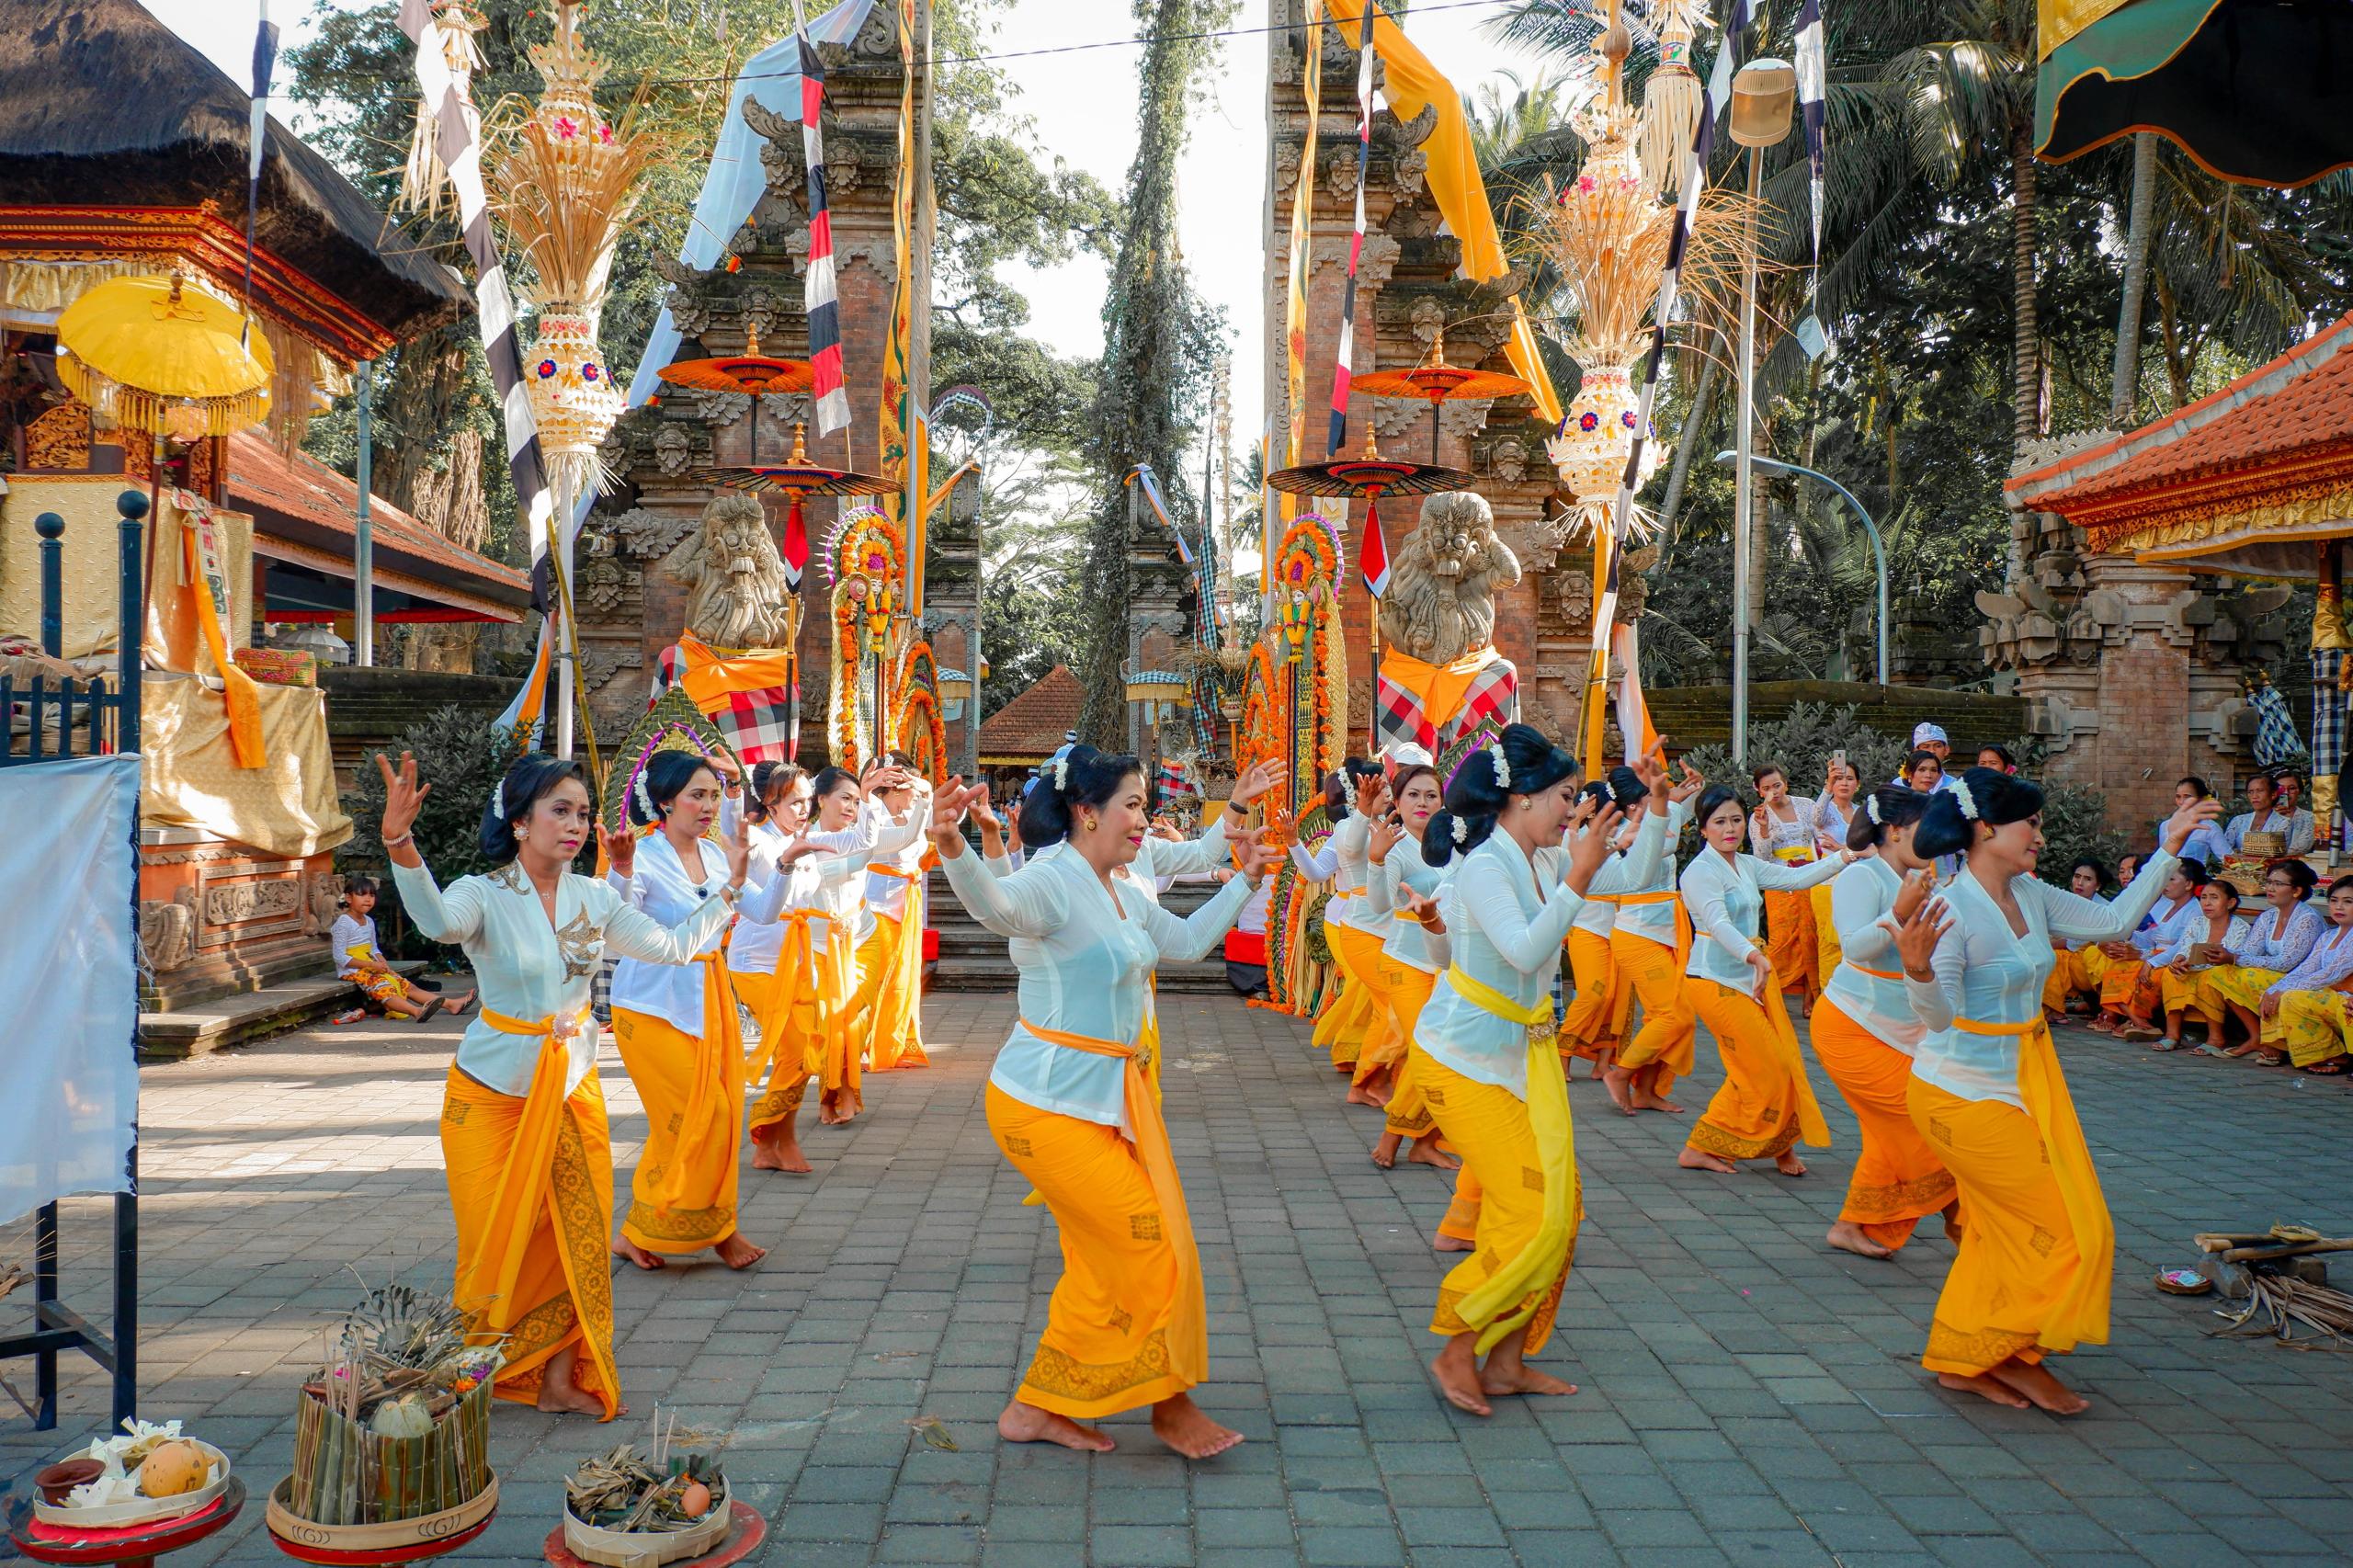 A Balinese temple, in front of it women dance in 4 rows. They wear white blouses and orange sarongs.